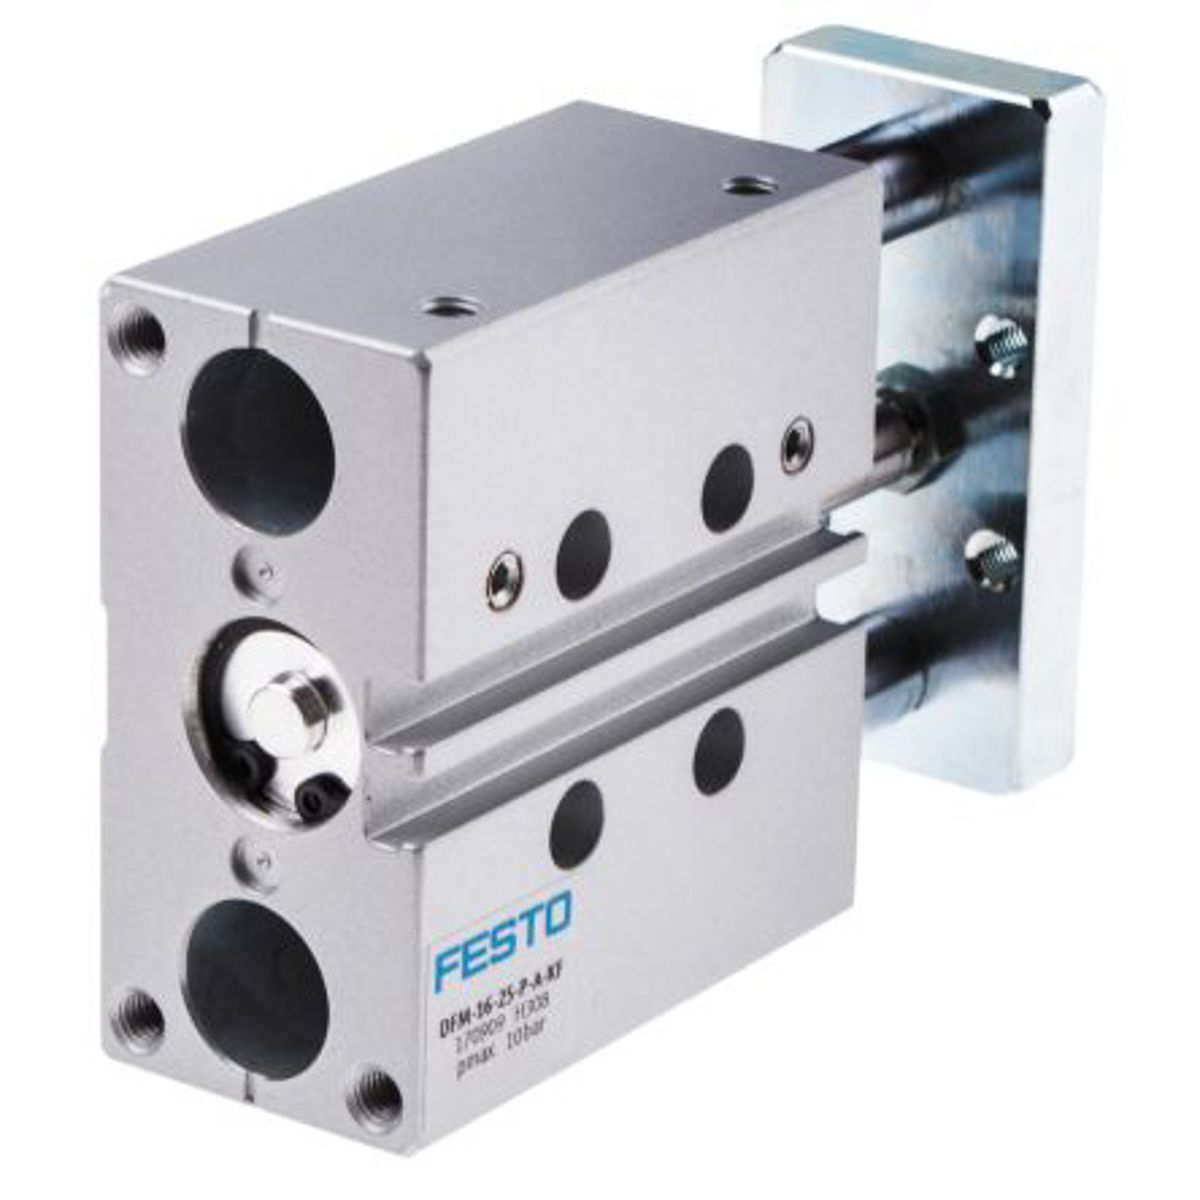 Dfm 16 30 P A Kf Festo Pneumatic Guided Cylinder 170910 16mm Bore